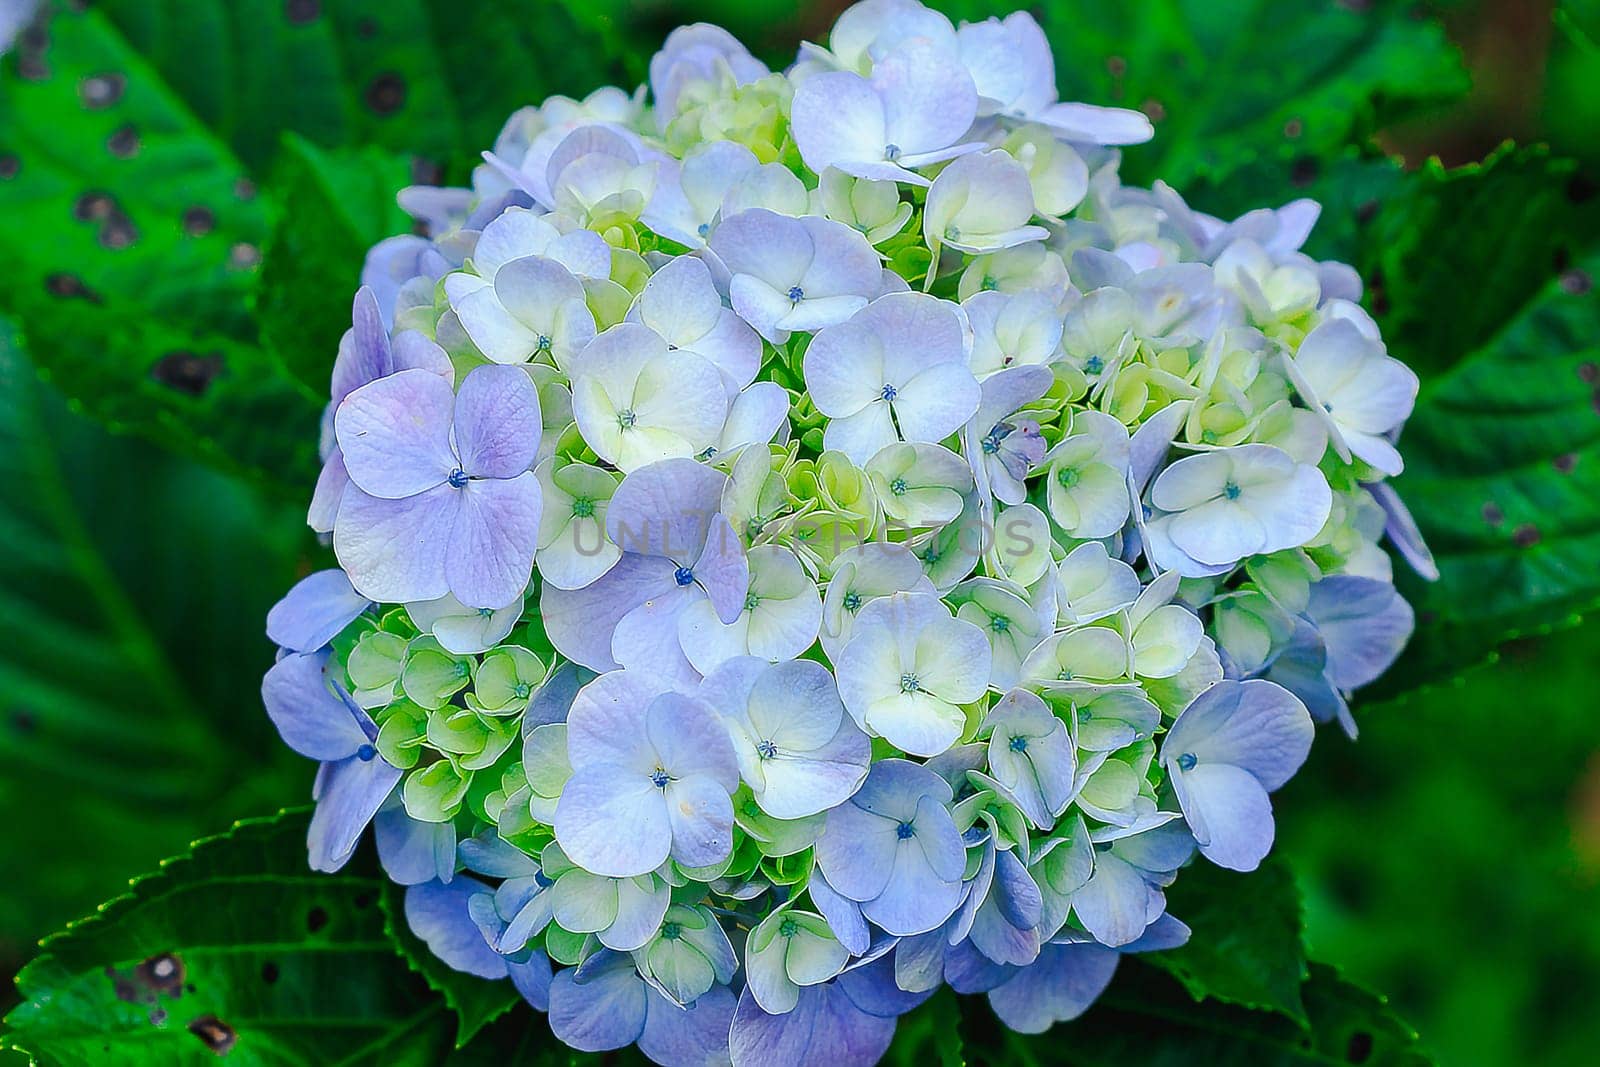 Hydrangea blue in the blooming garden.Which is a native plant in South Asia